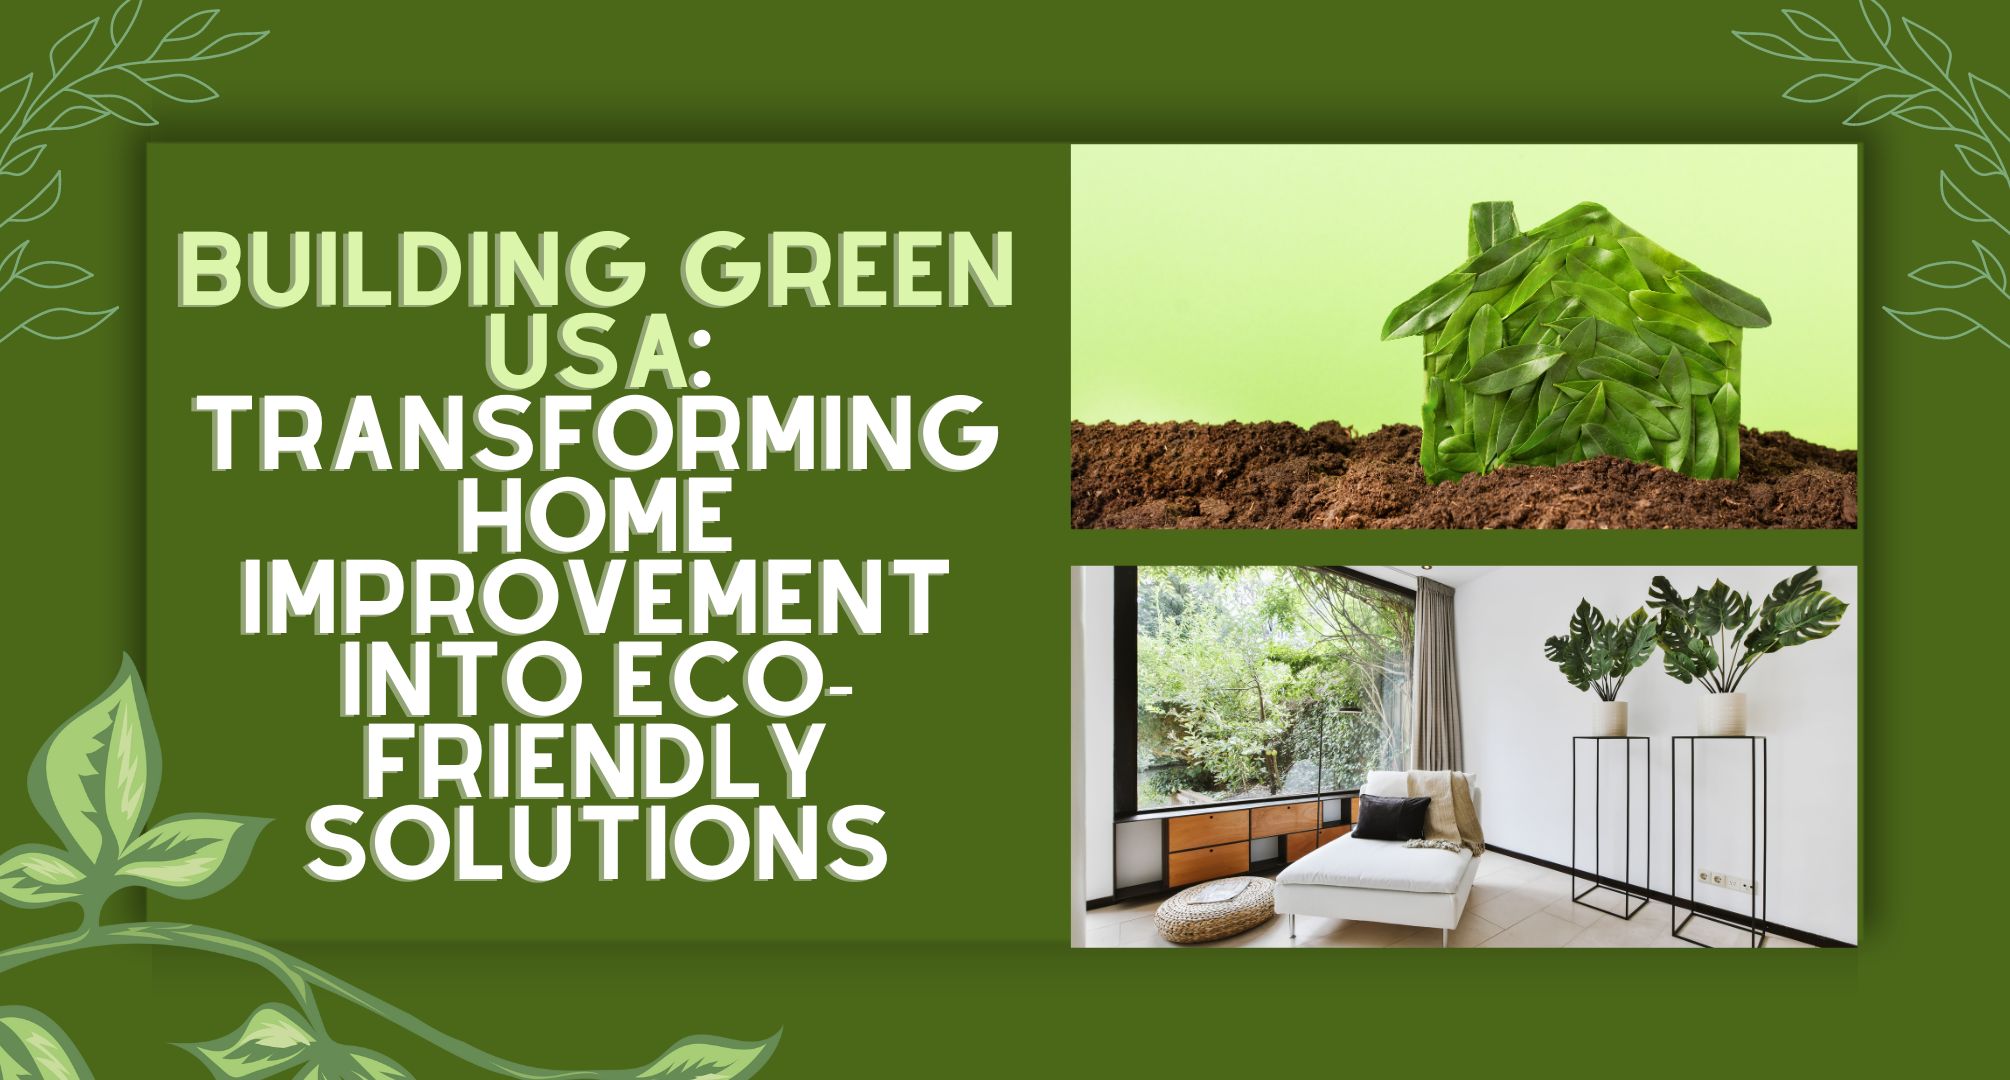 Building Green USA Transforming Home Improvement into Eco-Friendly Solutions